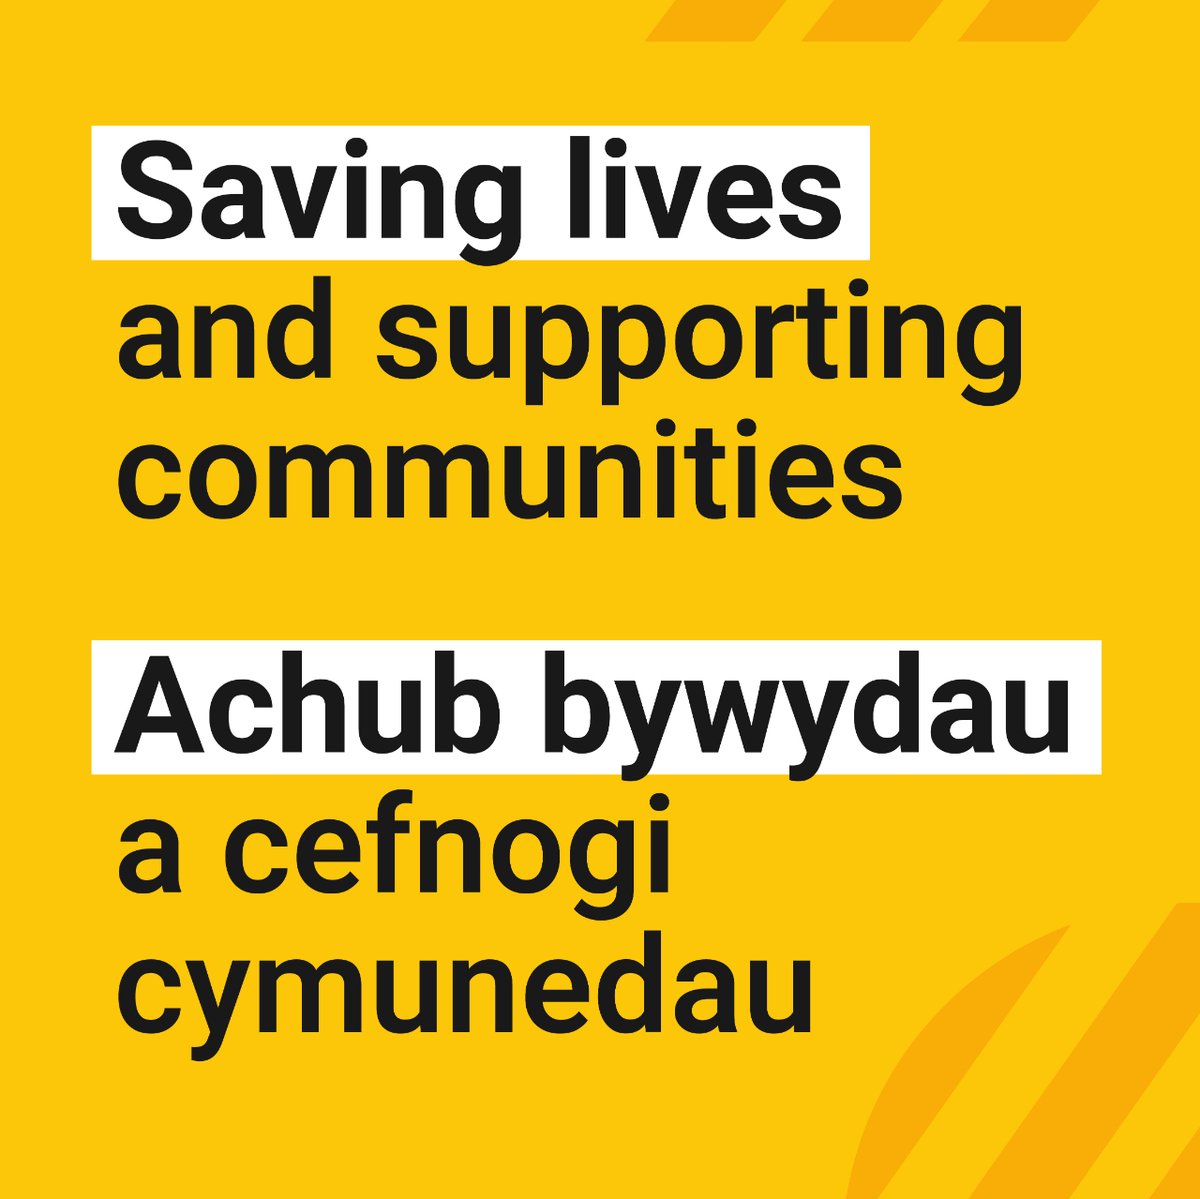 At St John Ambulance Cymru, we are committed to saving lives & supporting communities across Wales. We do this through first aid training, treatment & transport. 🚑 Our people work hard day in, day out, supporting the public & the NHS. Find out more: sjacymru.org.uk